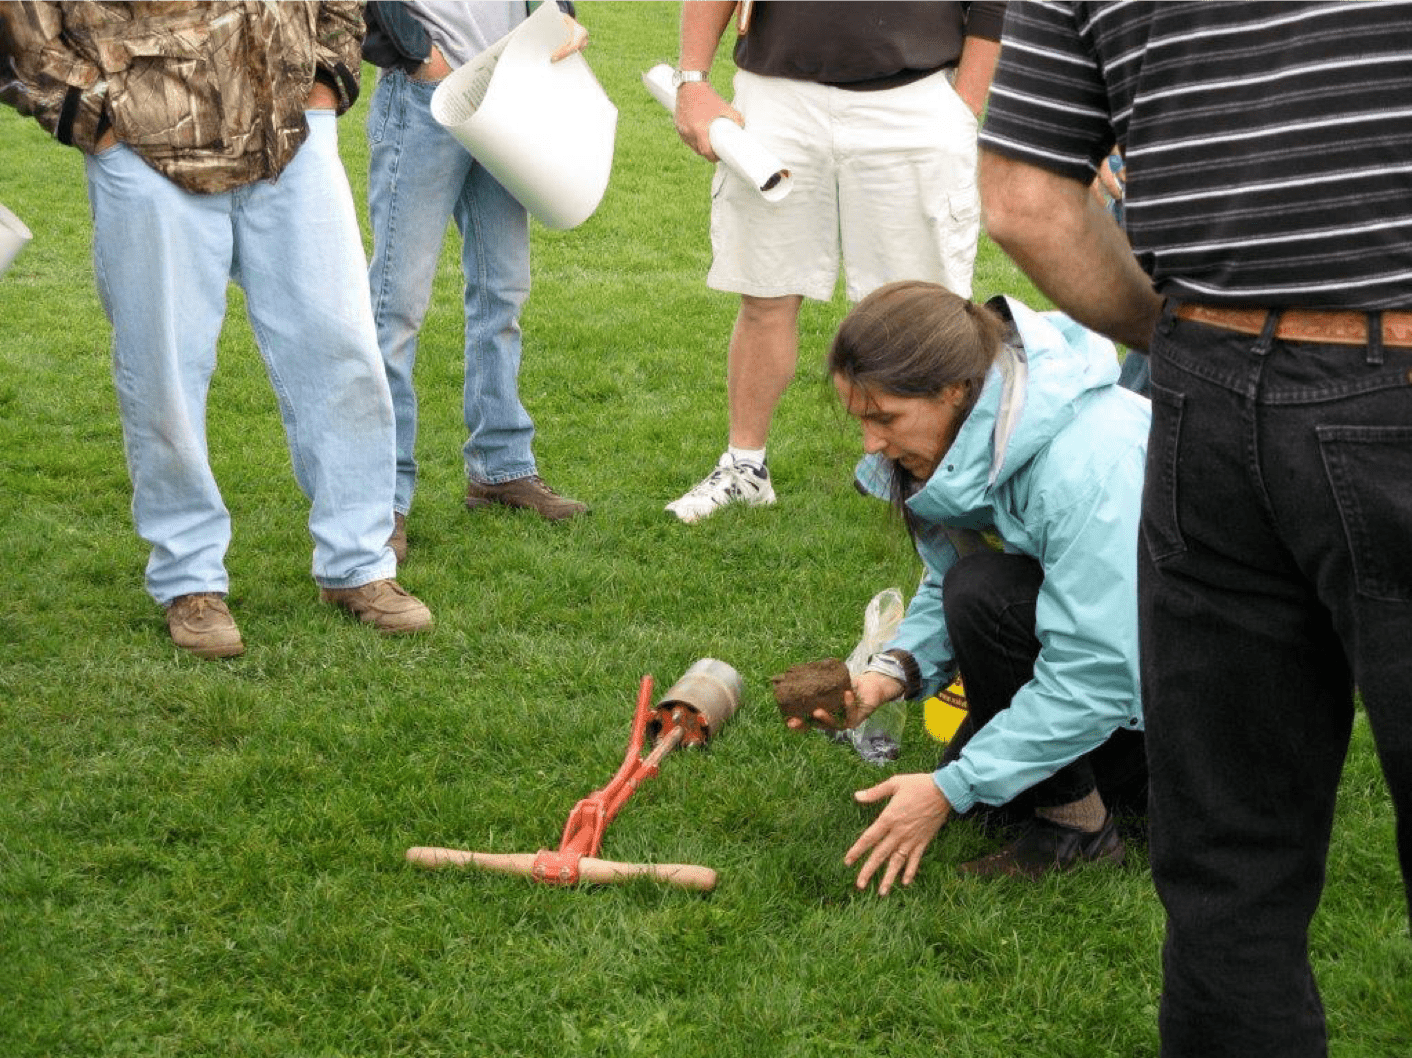 Photo shows Jen Grant kneeling to explain the use of a cup cutter to scout for grubs on turf as others watch